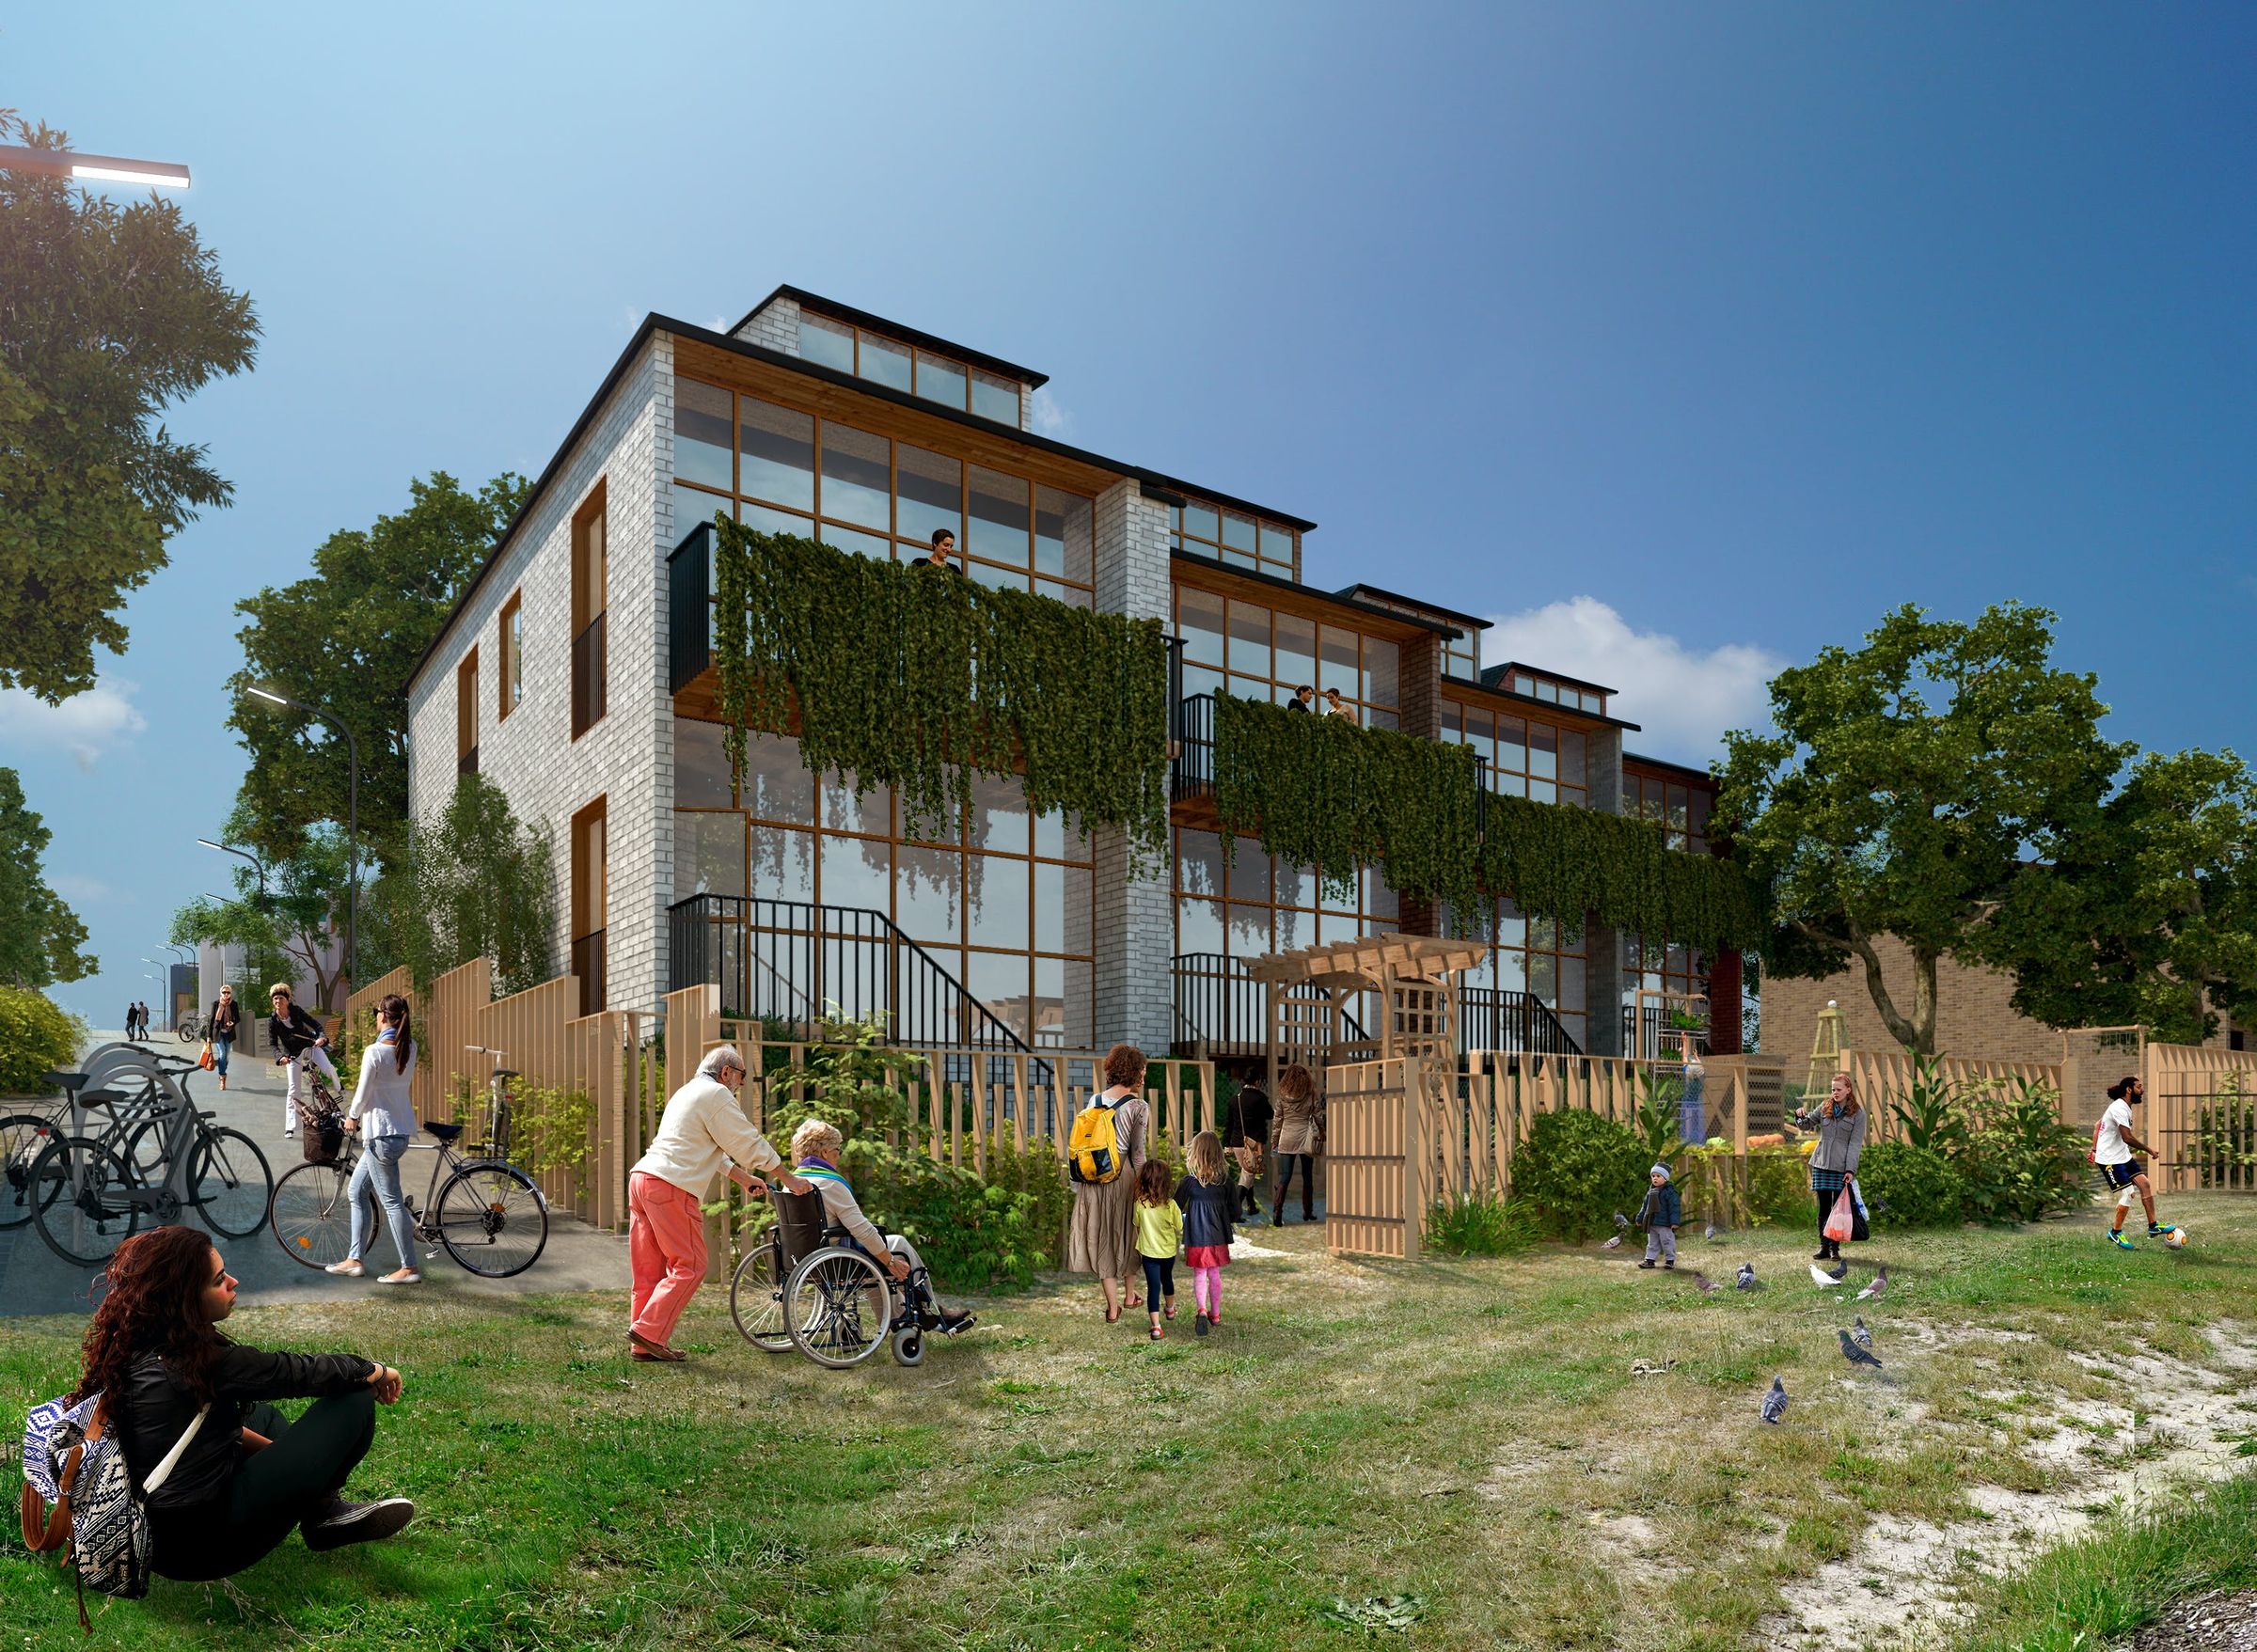 An image of two-storey, glass fronted townhouses leading onto an open green space where people of all ages and abilities are sitting, walking, playing and riding.